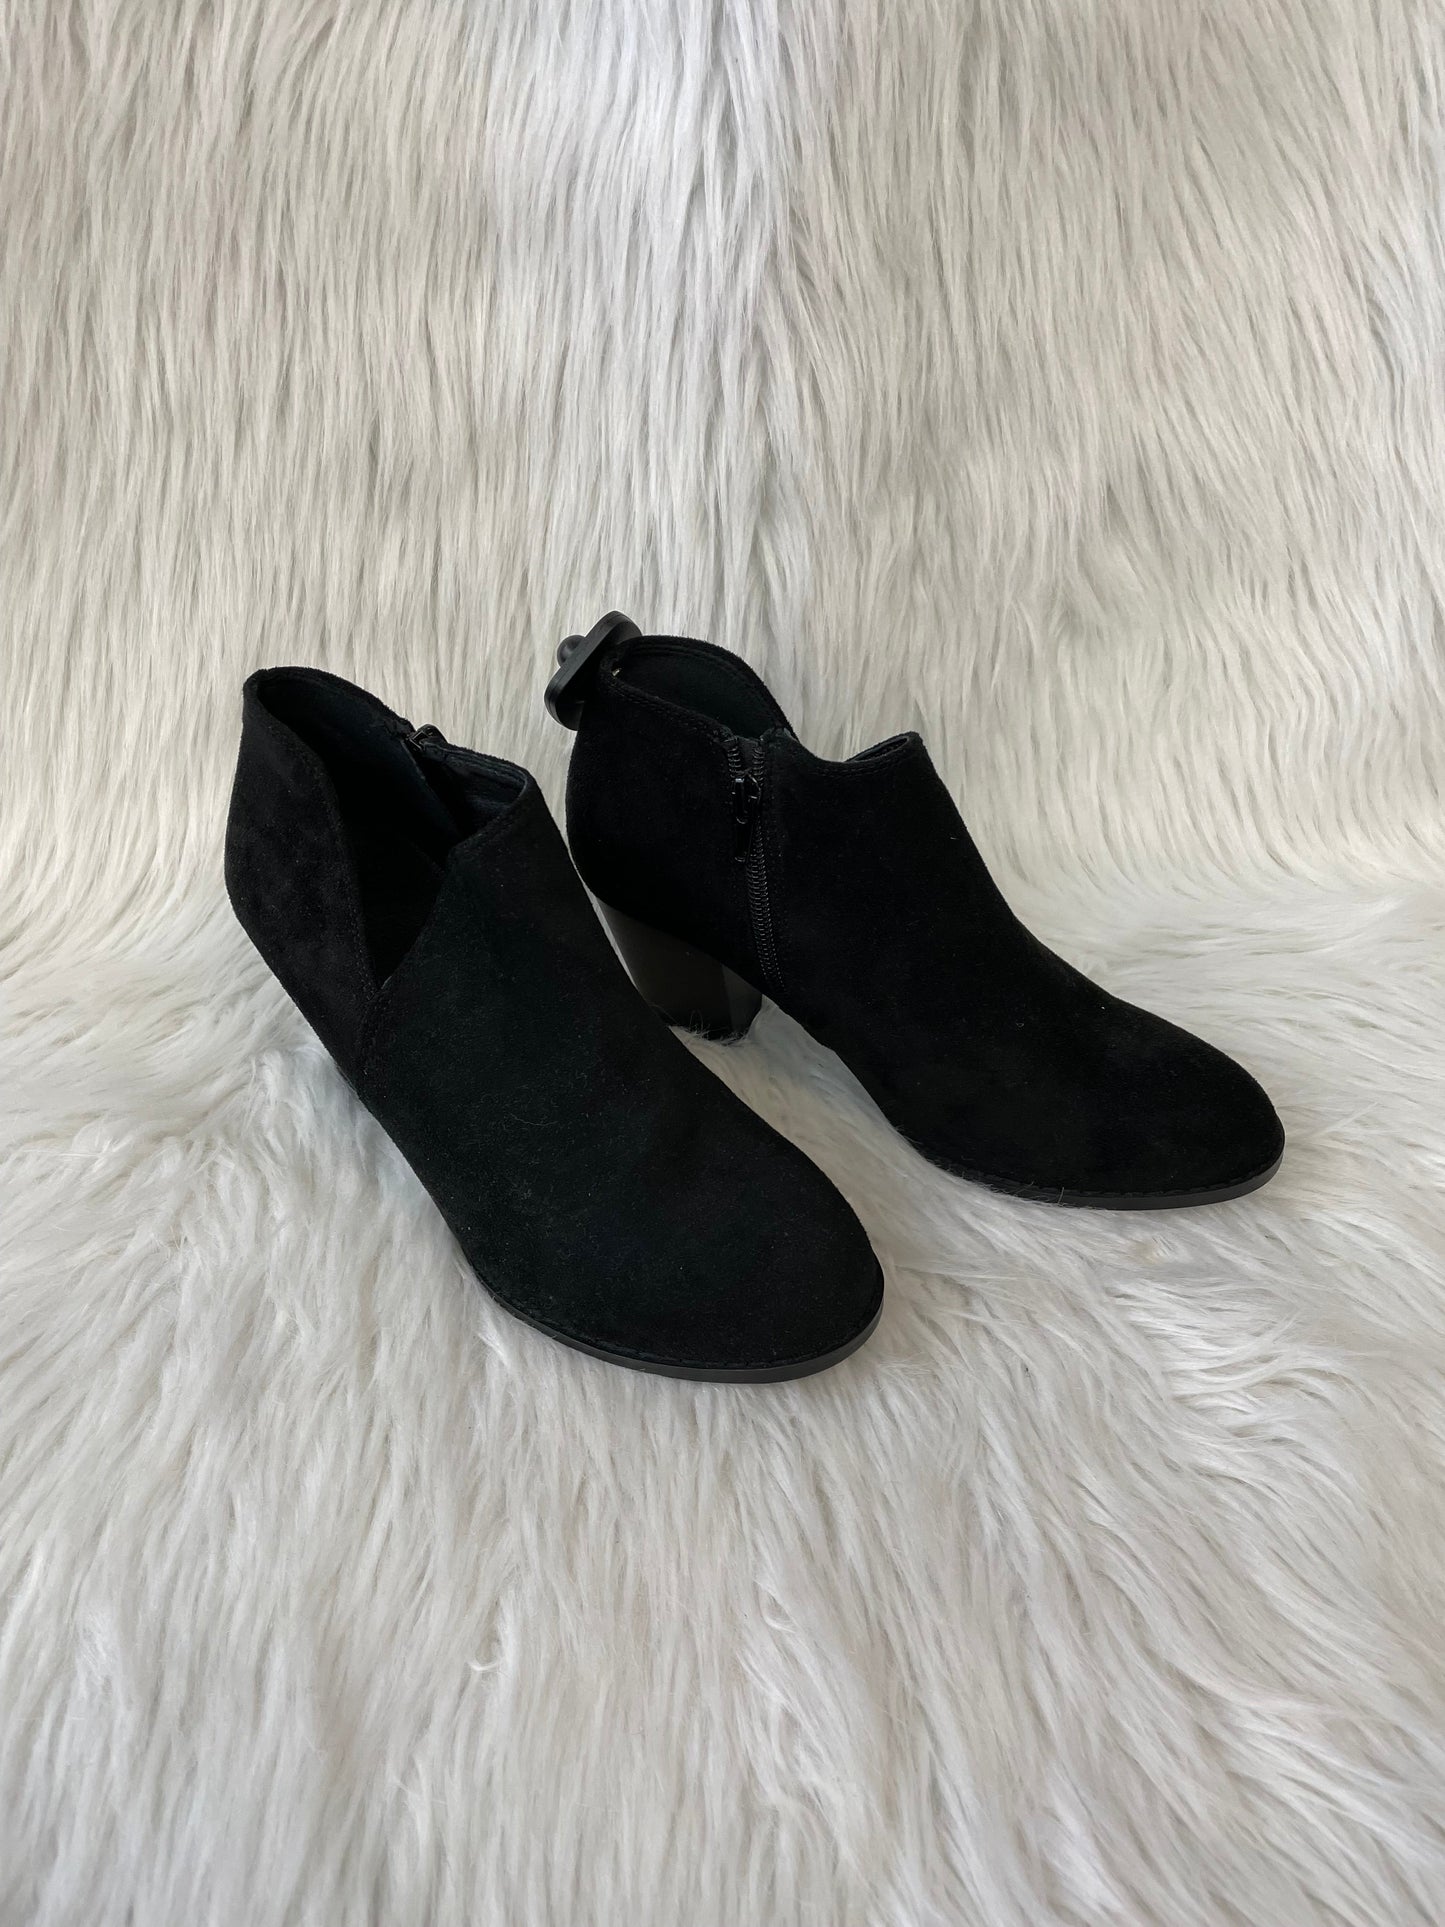 Black Boots Ankle Heels Clothes Mentor, Size 8